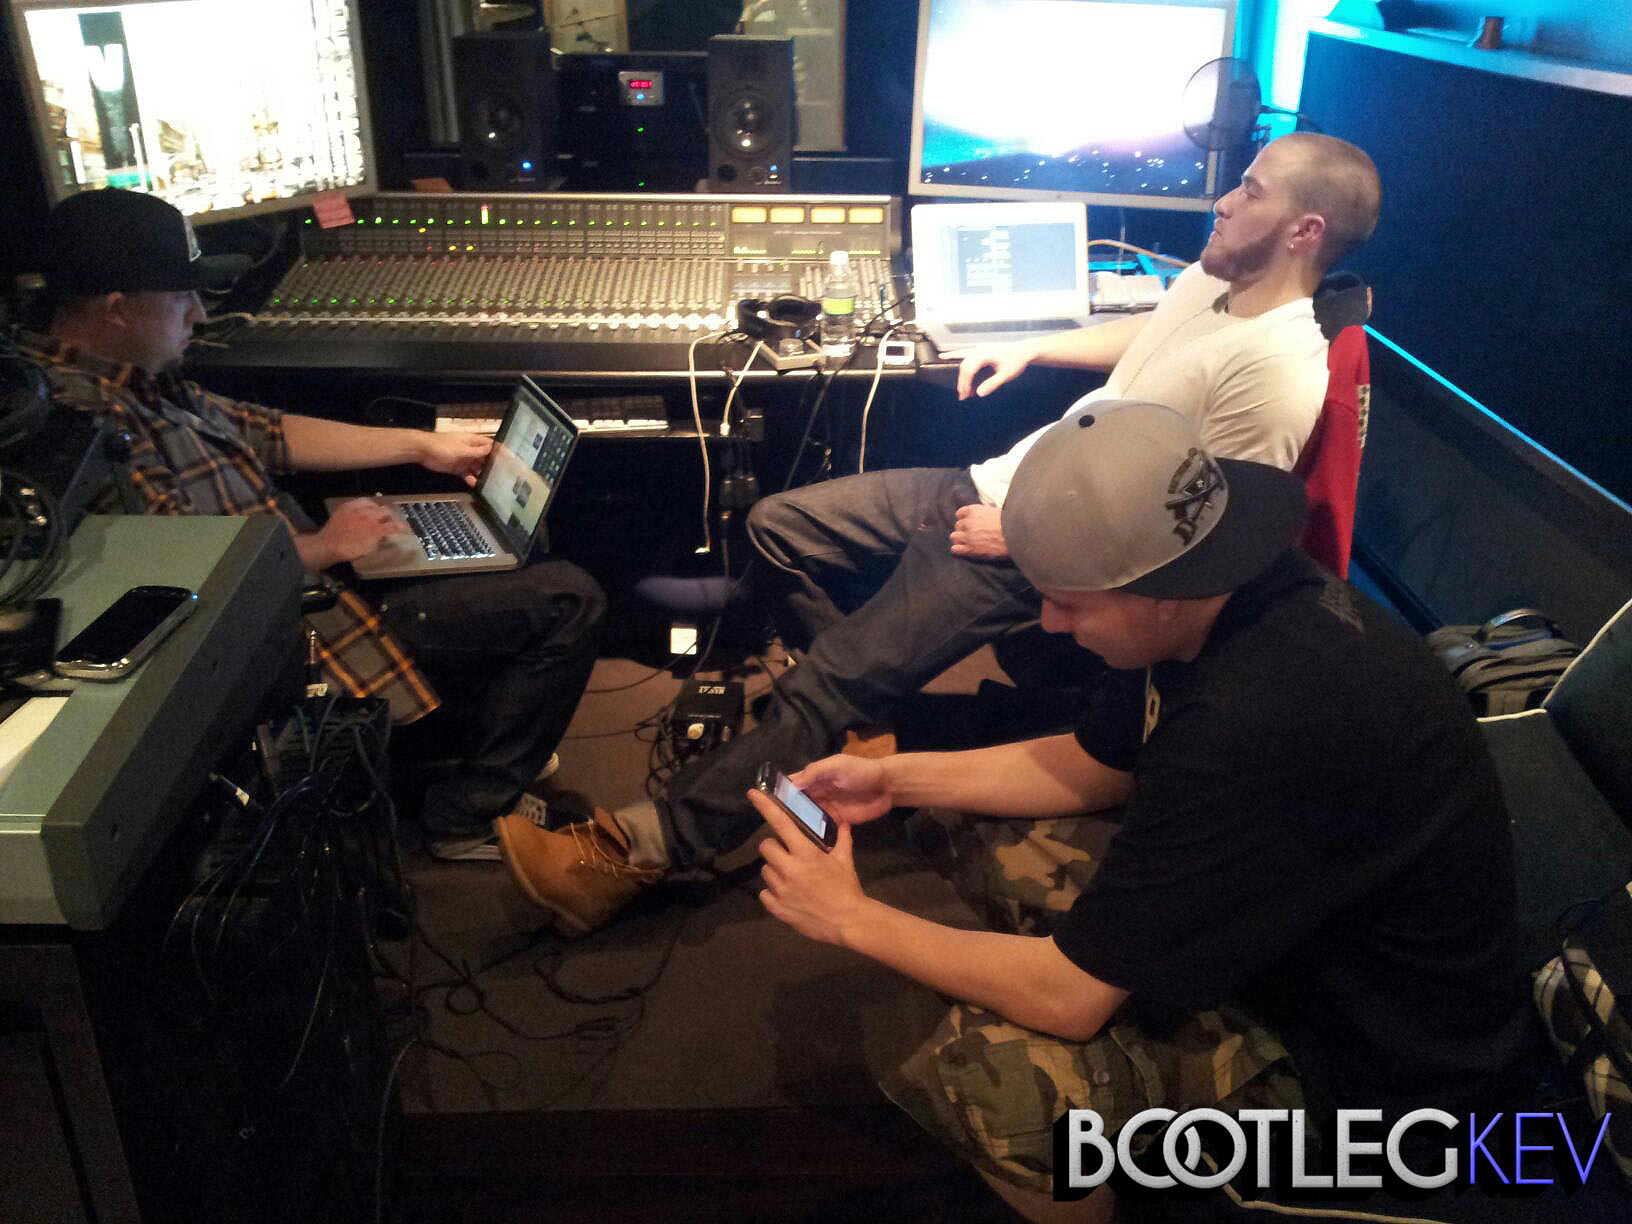 Lifted, Mike Posner and Bootleg Kev in the studio March 2012
bootlegkev.com
